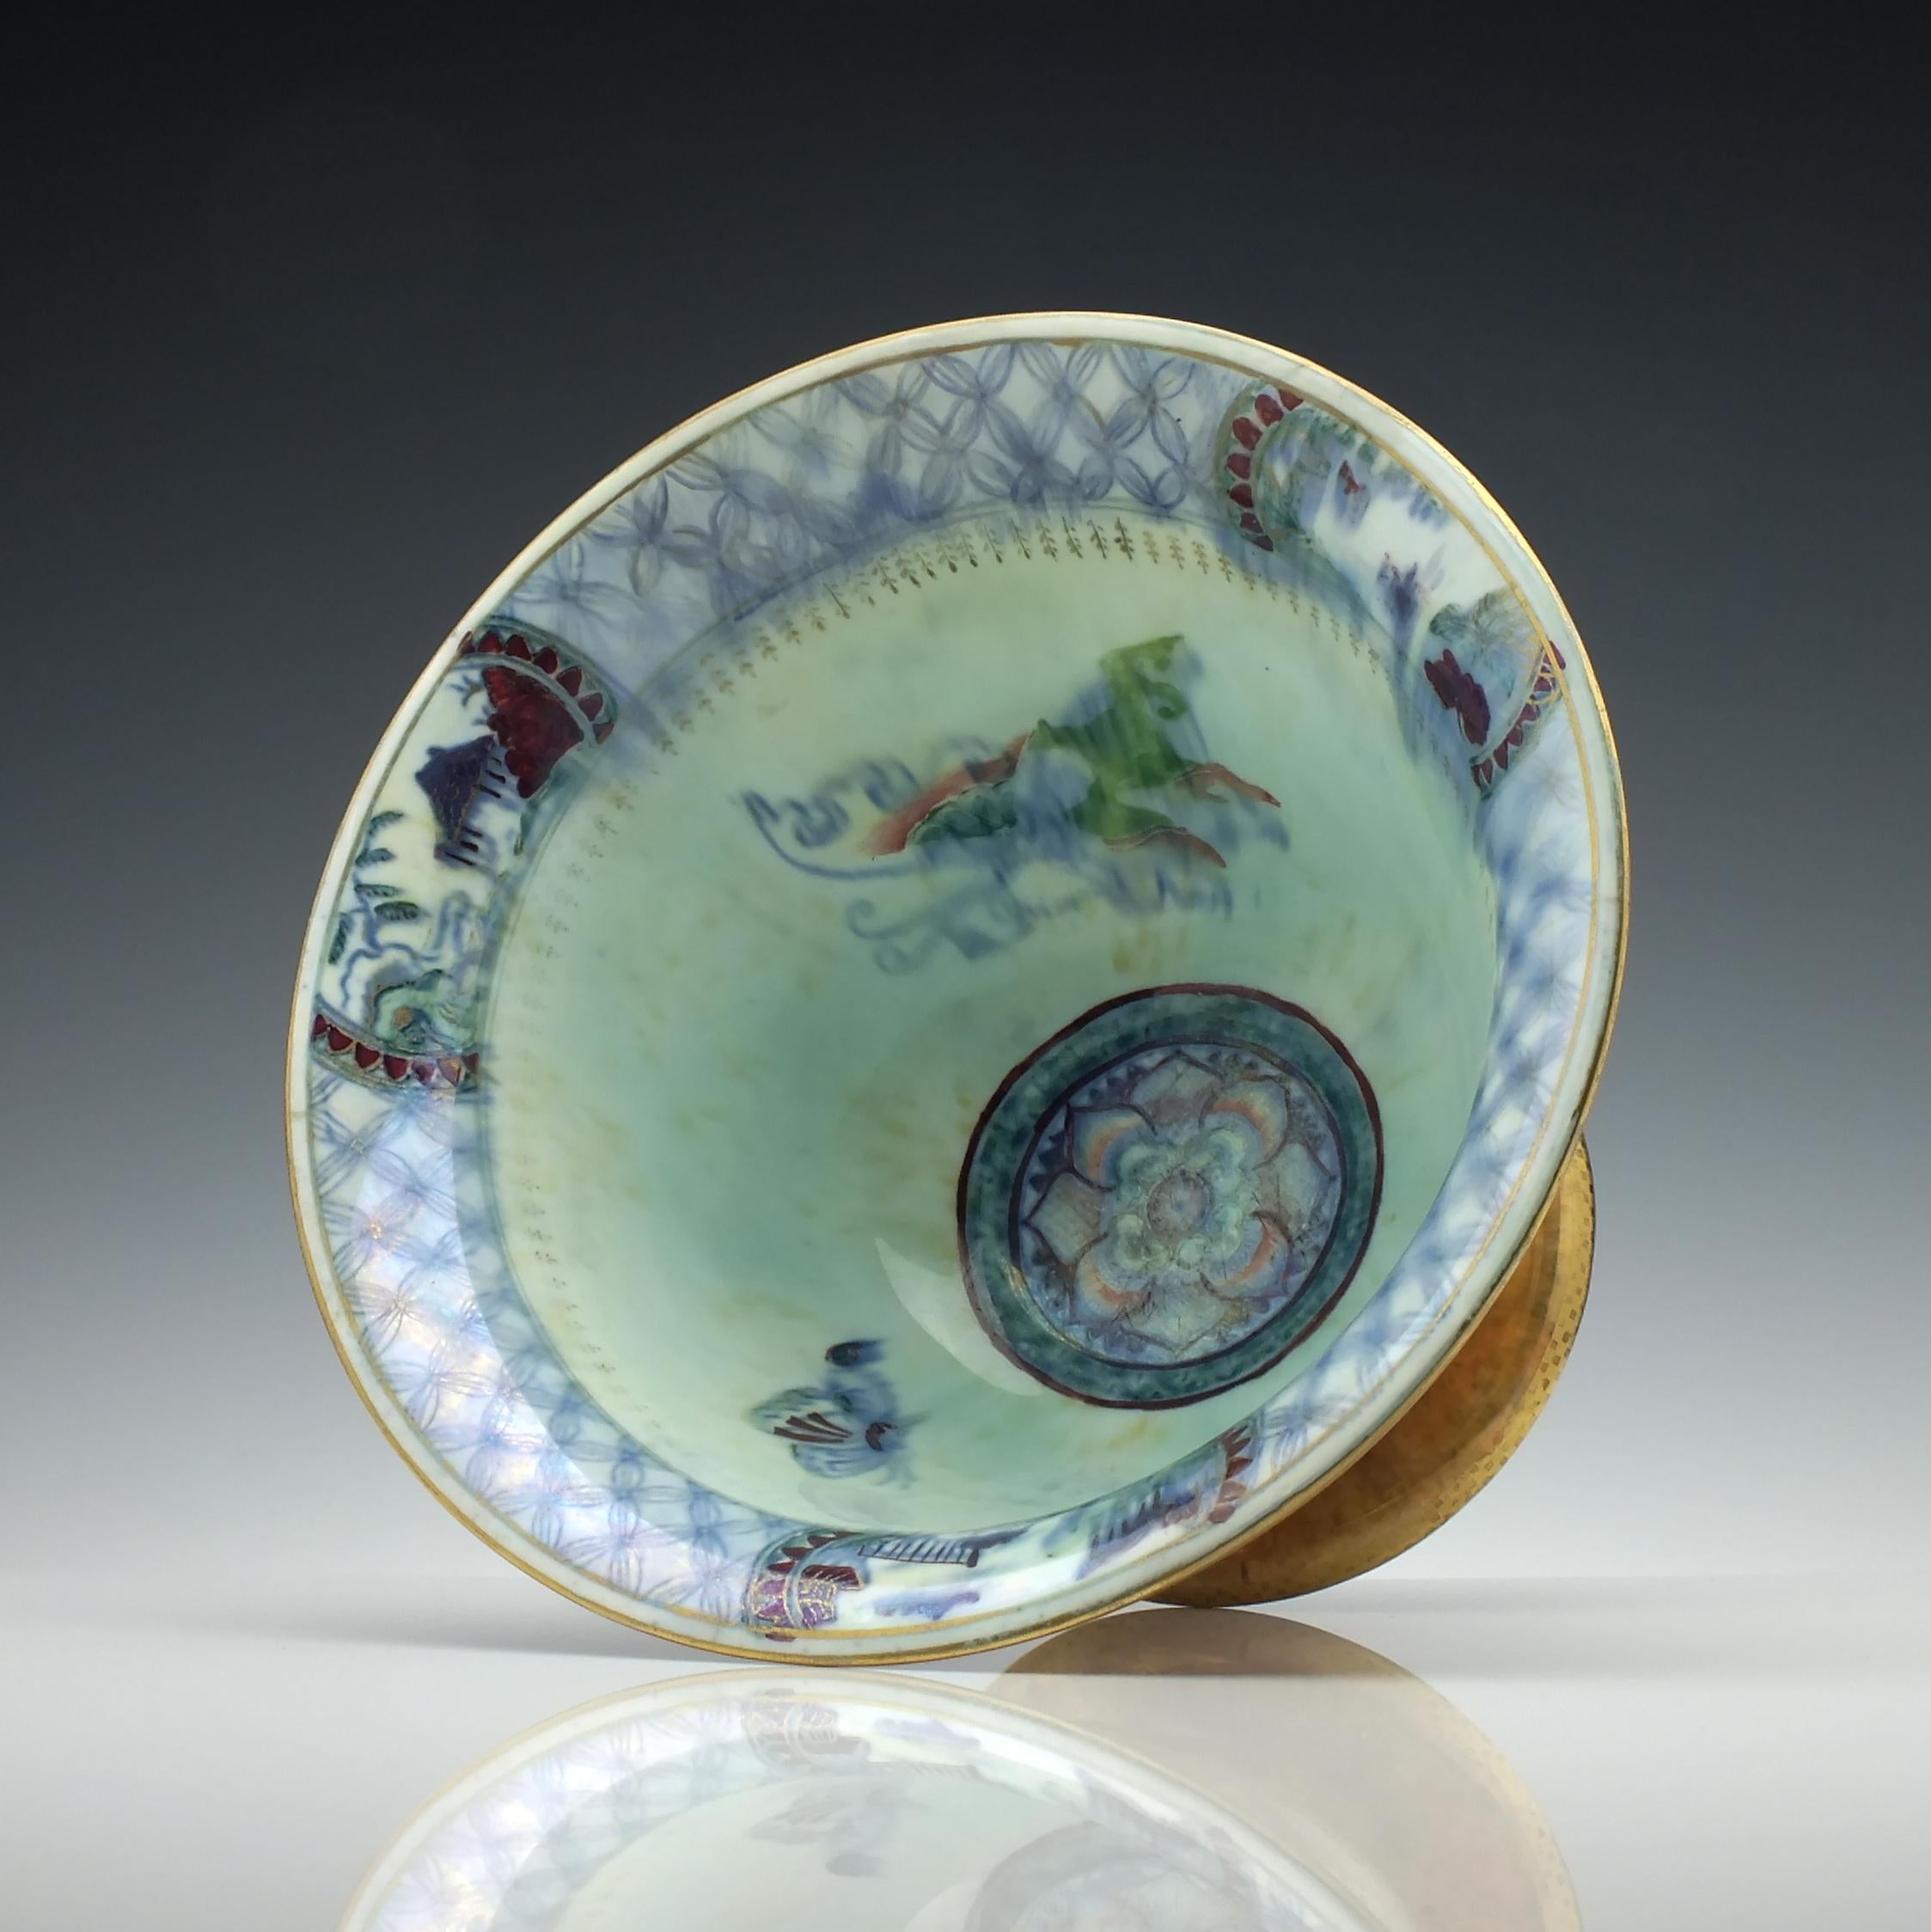 Porcelain Wedgwood Butterfly Pattern Lustre Bowl, circa 1920